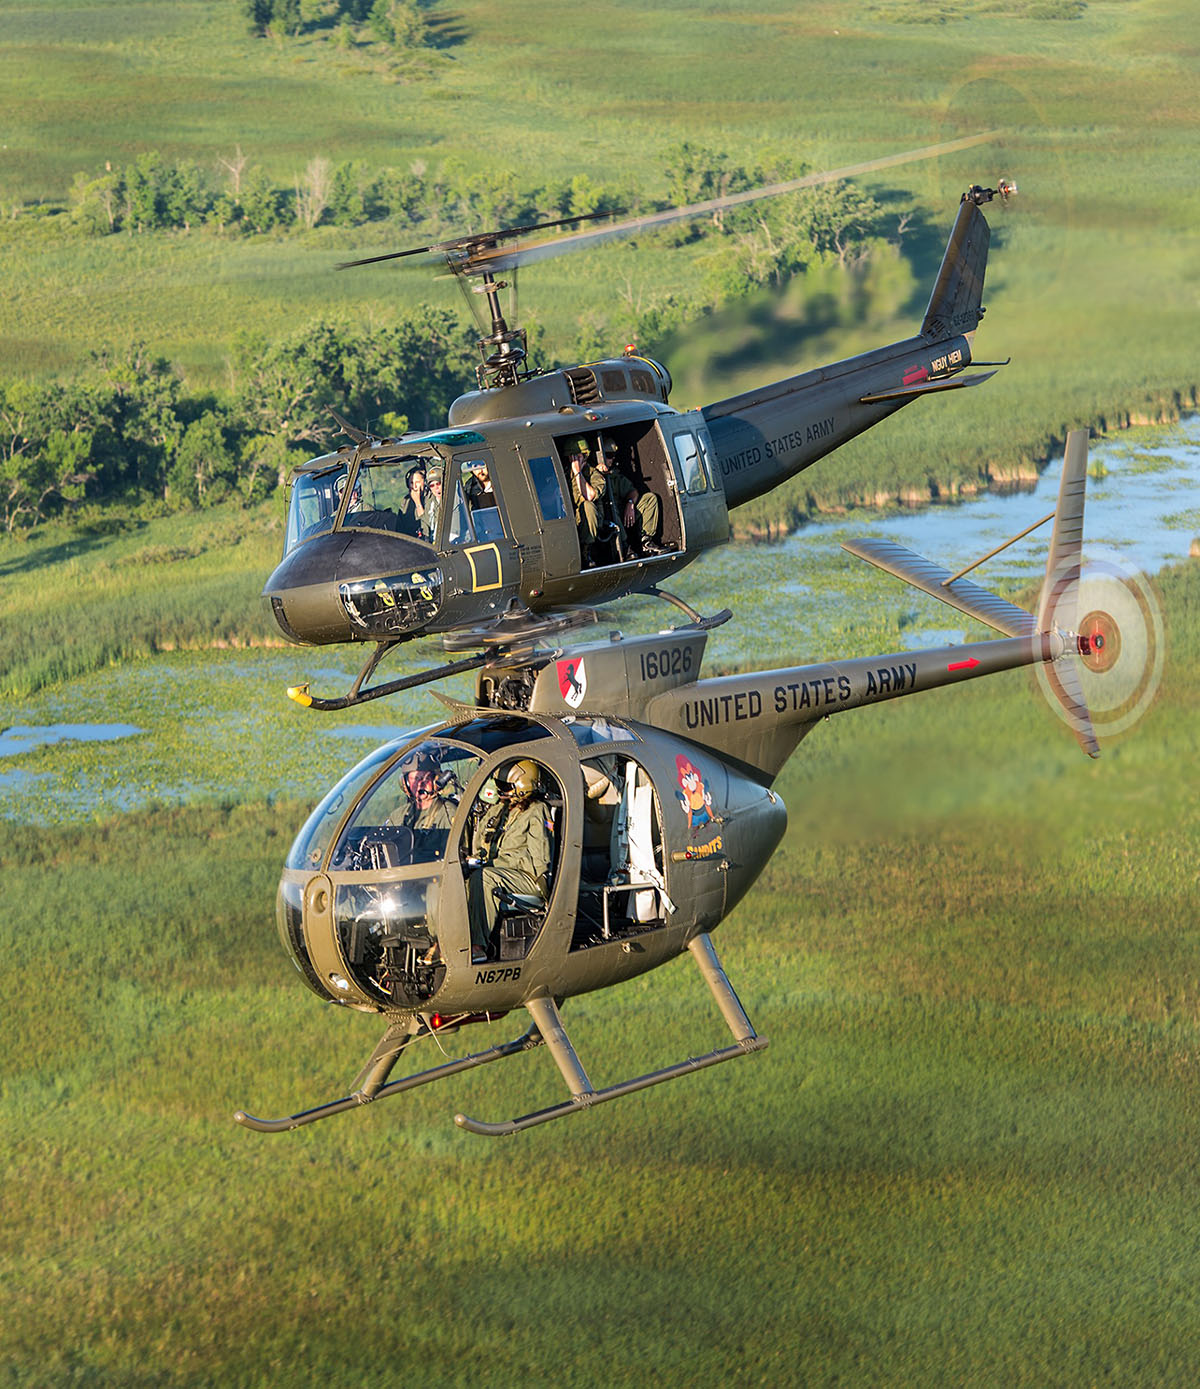 The history of military helicopters